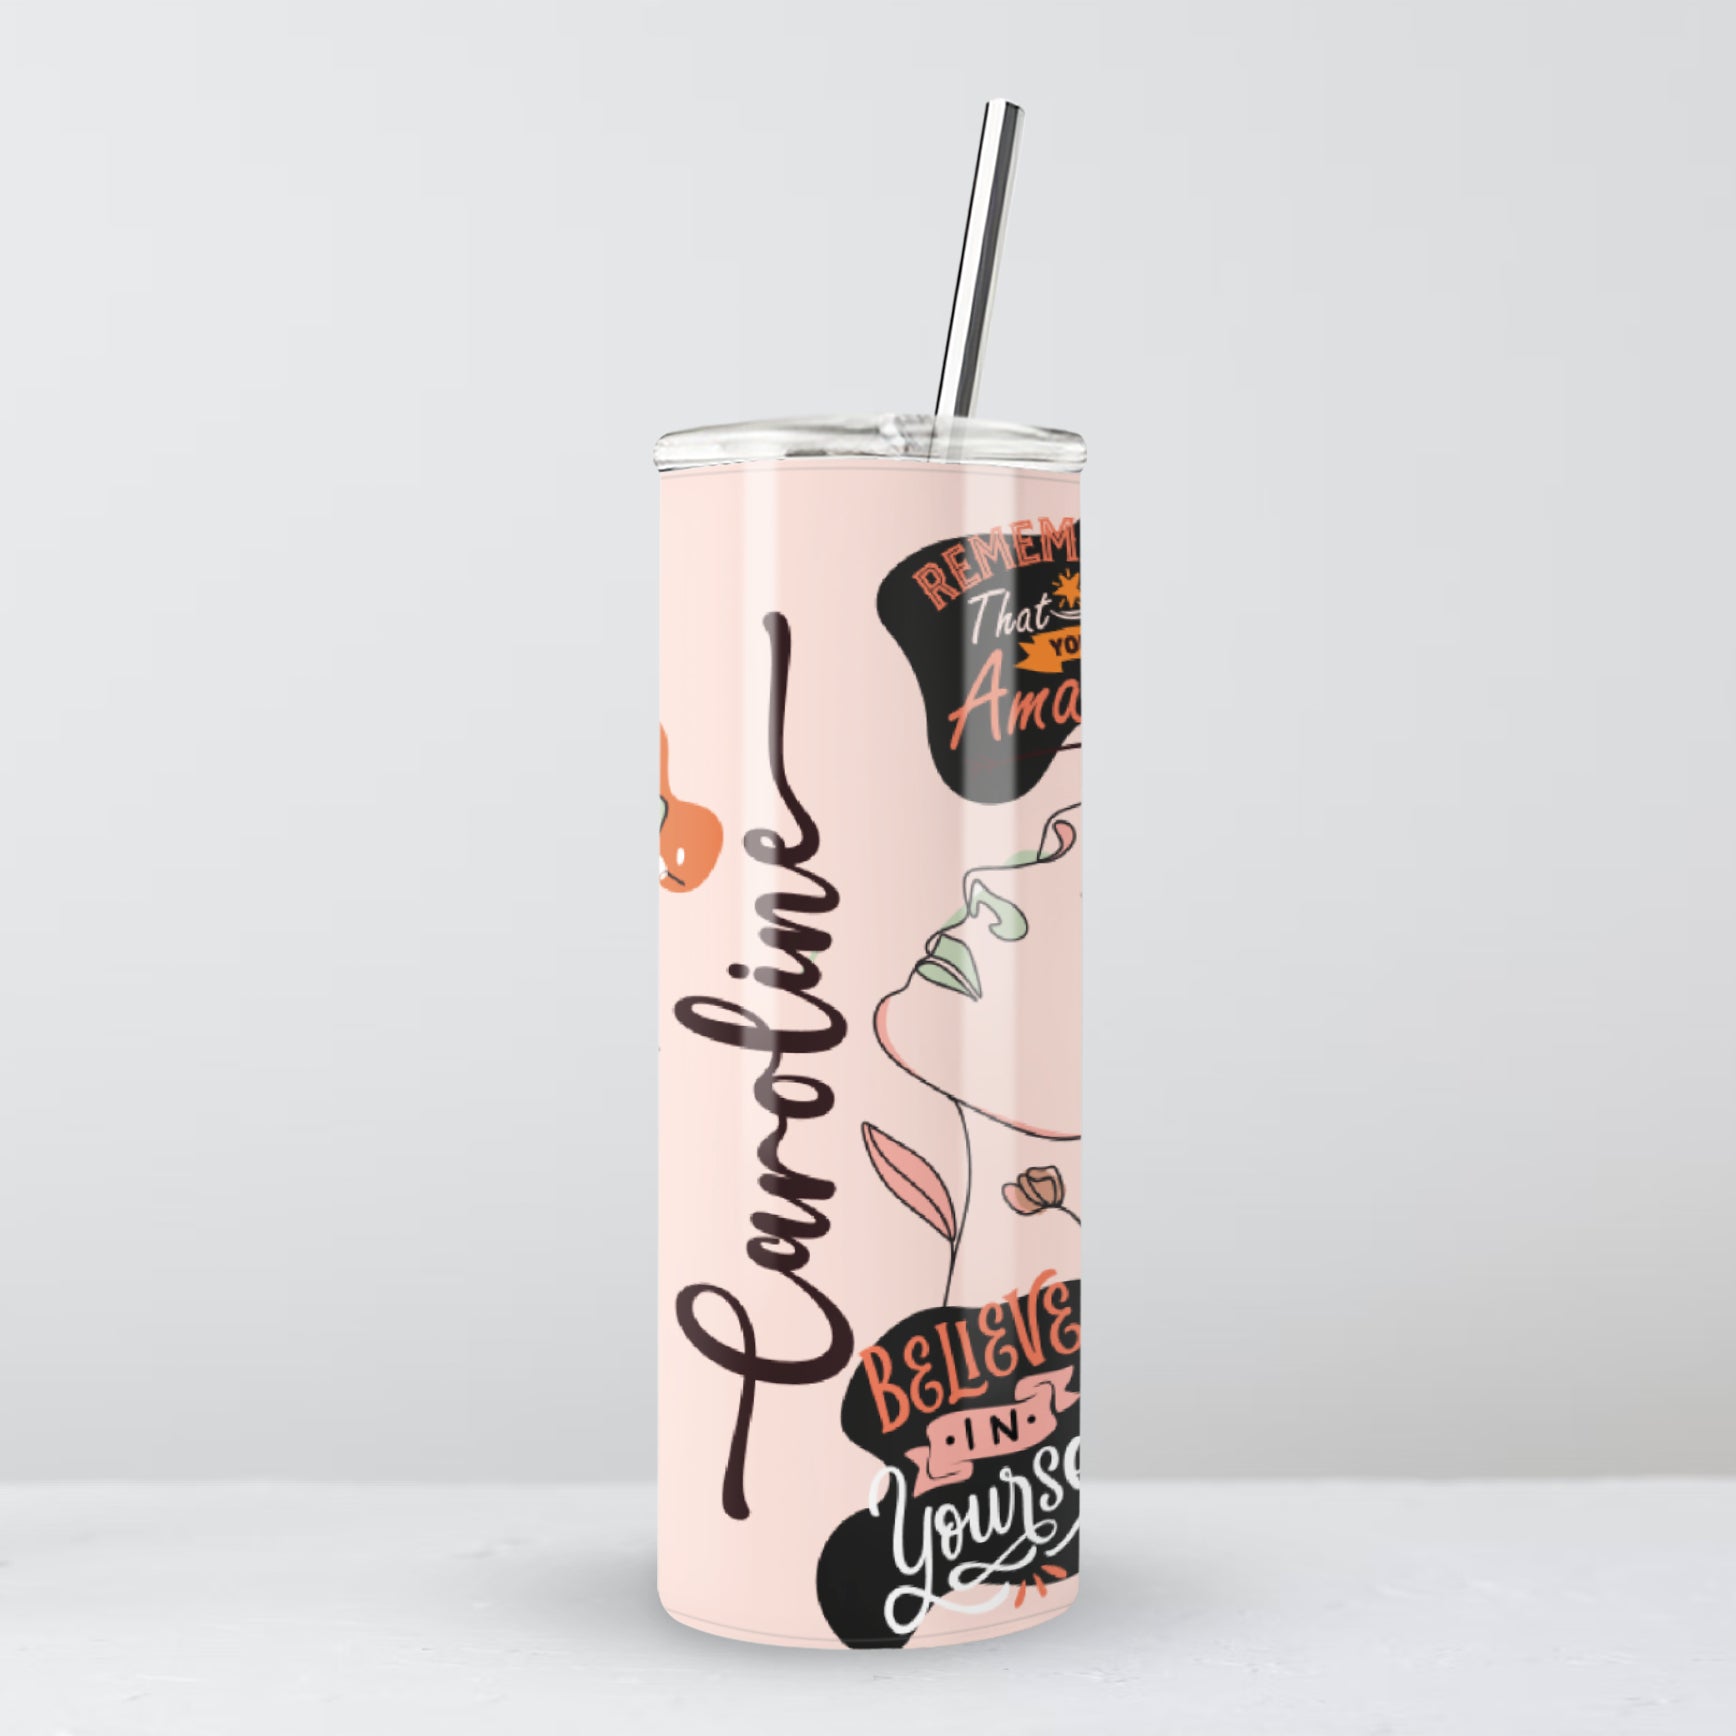 Custom Tumbler With Straw, Personalized Gifts for Her, Womens